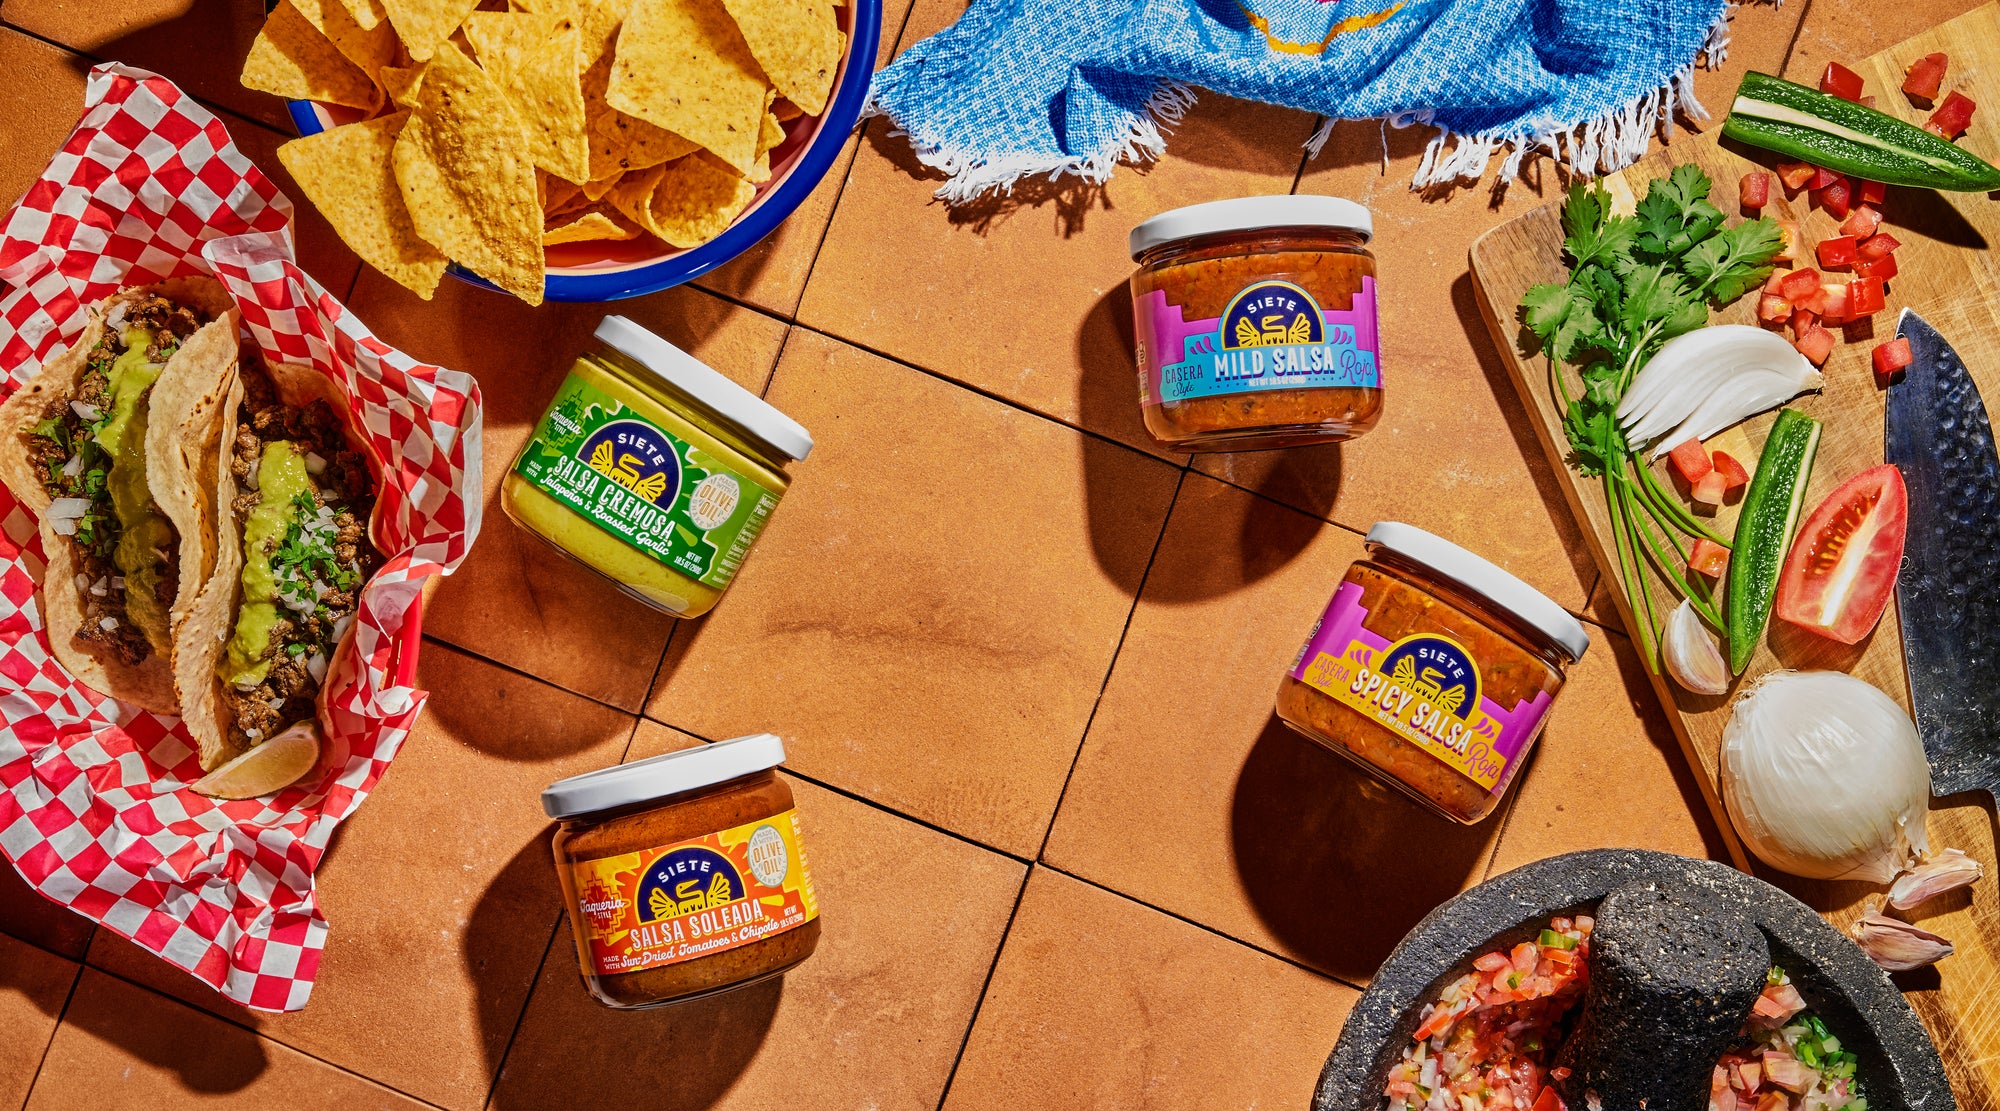 INTRODUCING OUR NEW SALSAS!